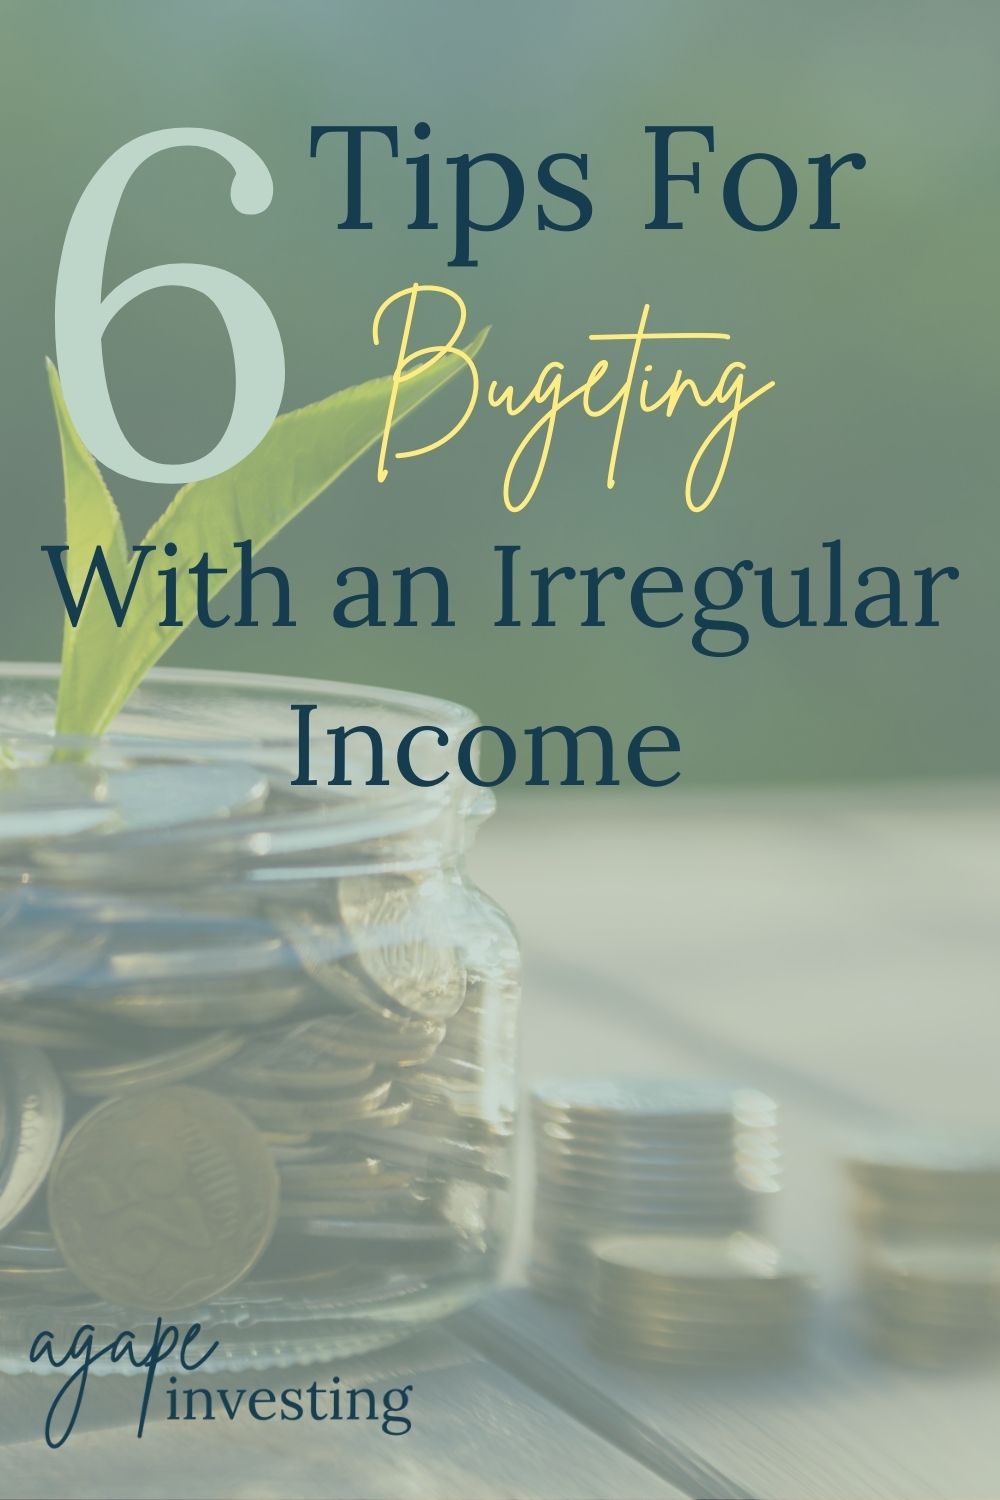 6 Tips for Budgeting With an Irregular Income